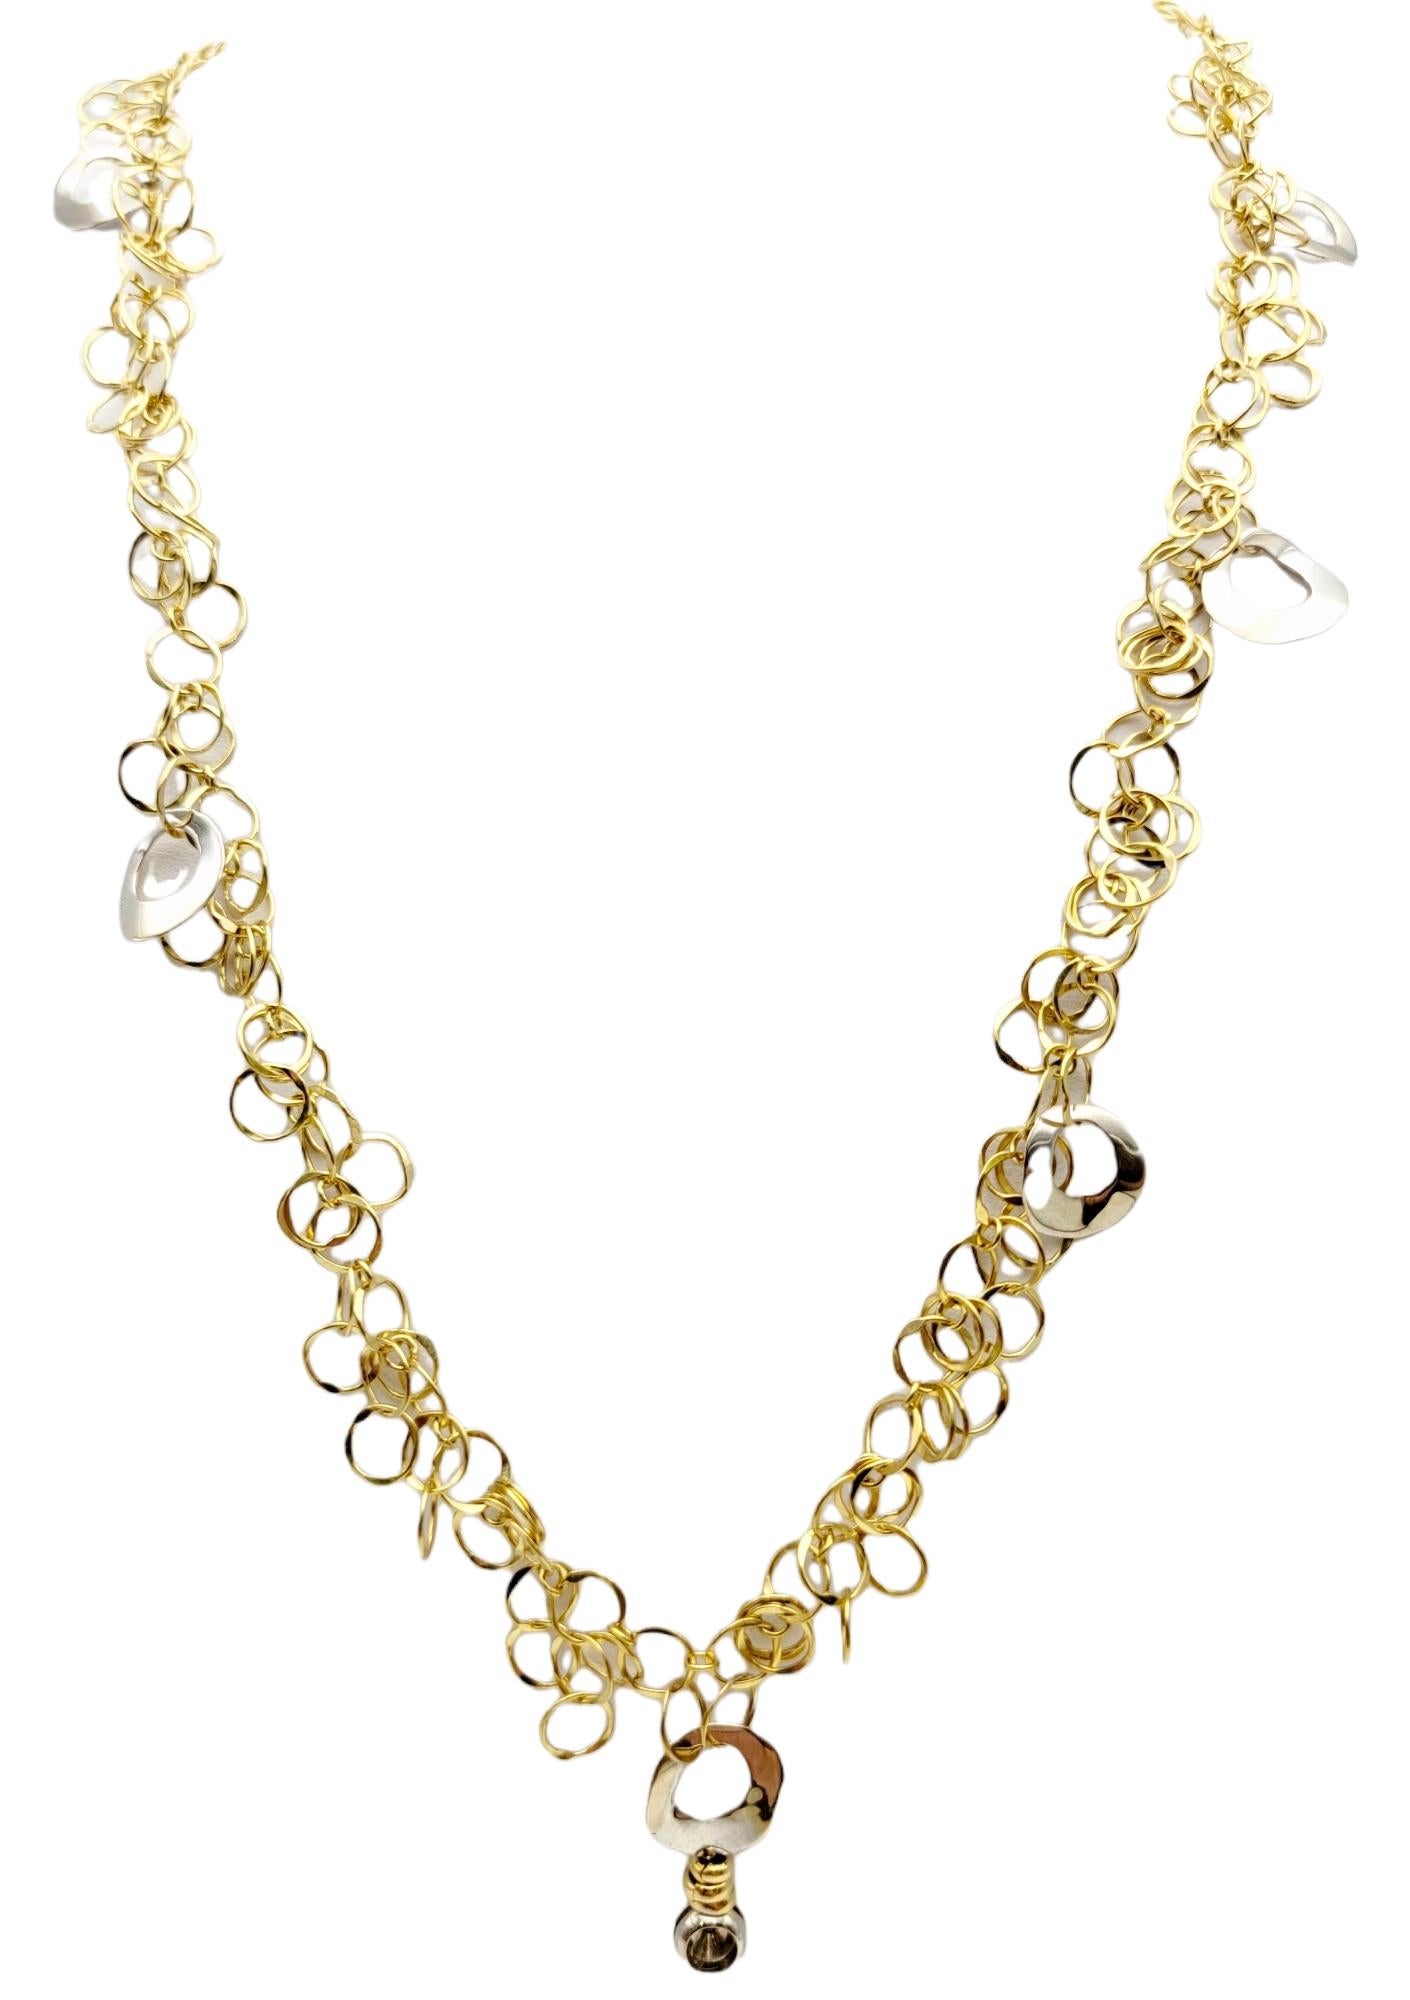 This beautiful necklace is a delicate masterpiece designed by Orlando Orlandini. It features a series of hammered yellow gold interlocking open circle links accented by a few larger white gold discs. Dangling off the center disc is a single bezel